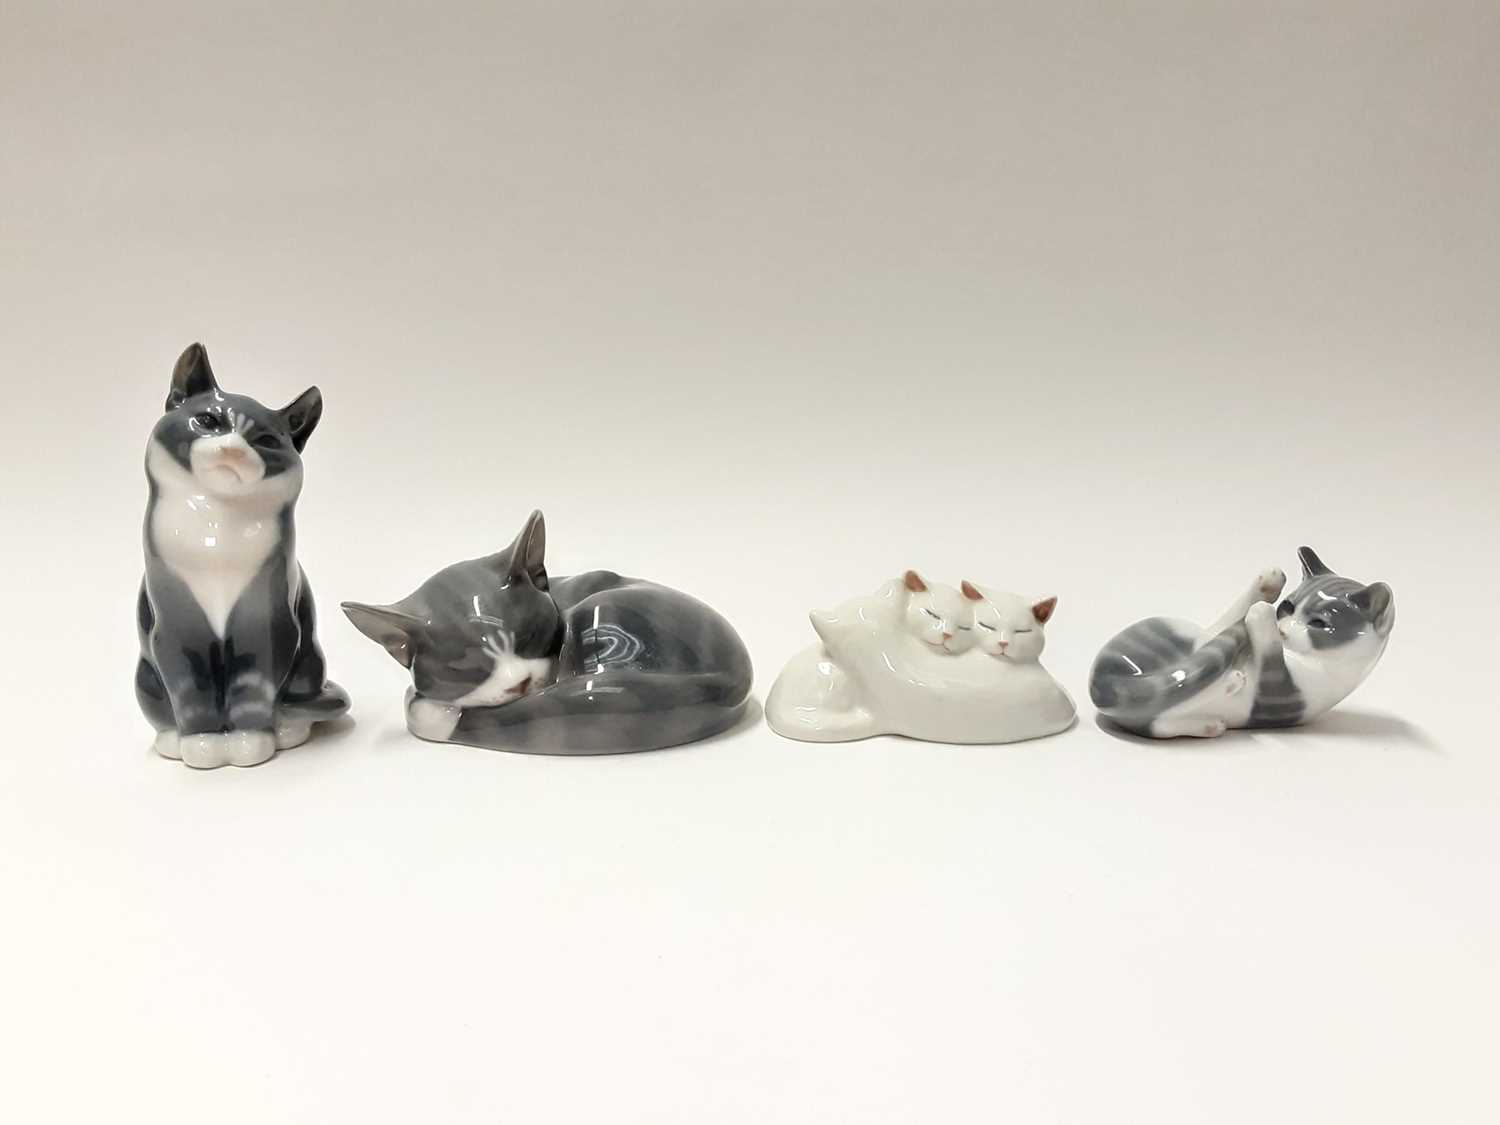 Lot 153 - Four Royal Copenhagen cats, model numbers 304, 1803, 222 and 422